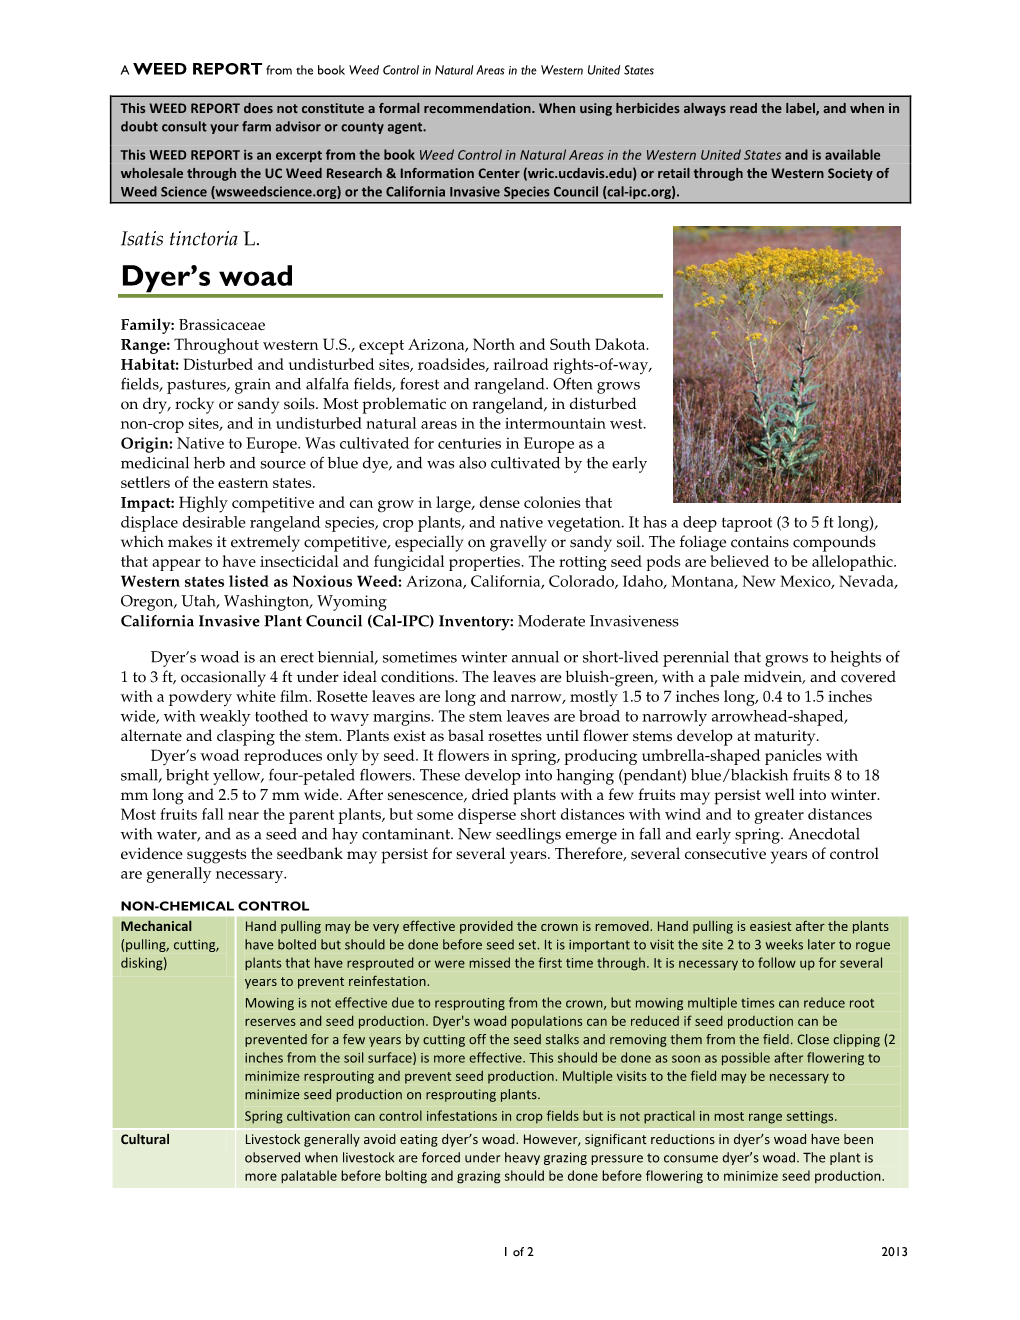 Dyer's Woad Populations Can Be Reduced If Seed Production Can Be Prevented for a Few Years by Cutting Off the Seed Stalks and Removing Them from the Field